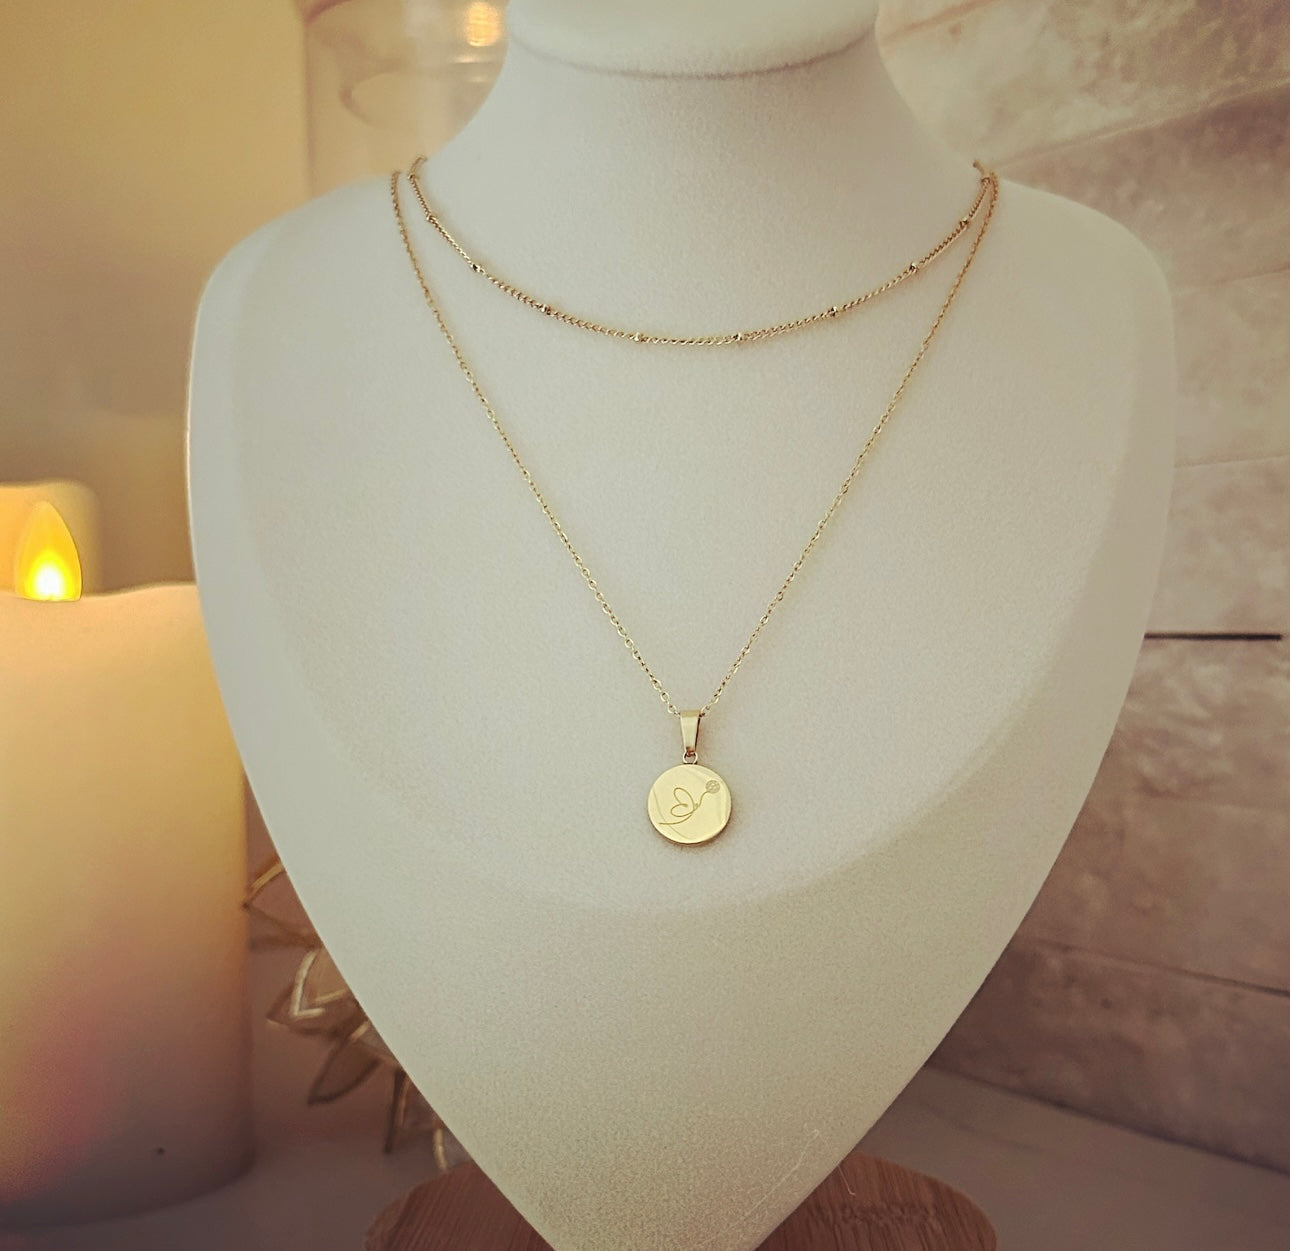 The Dainty Dinker Necklace